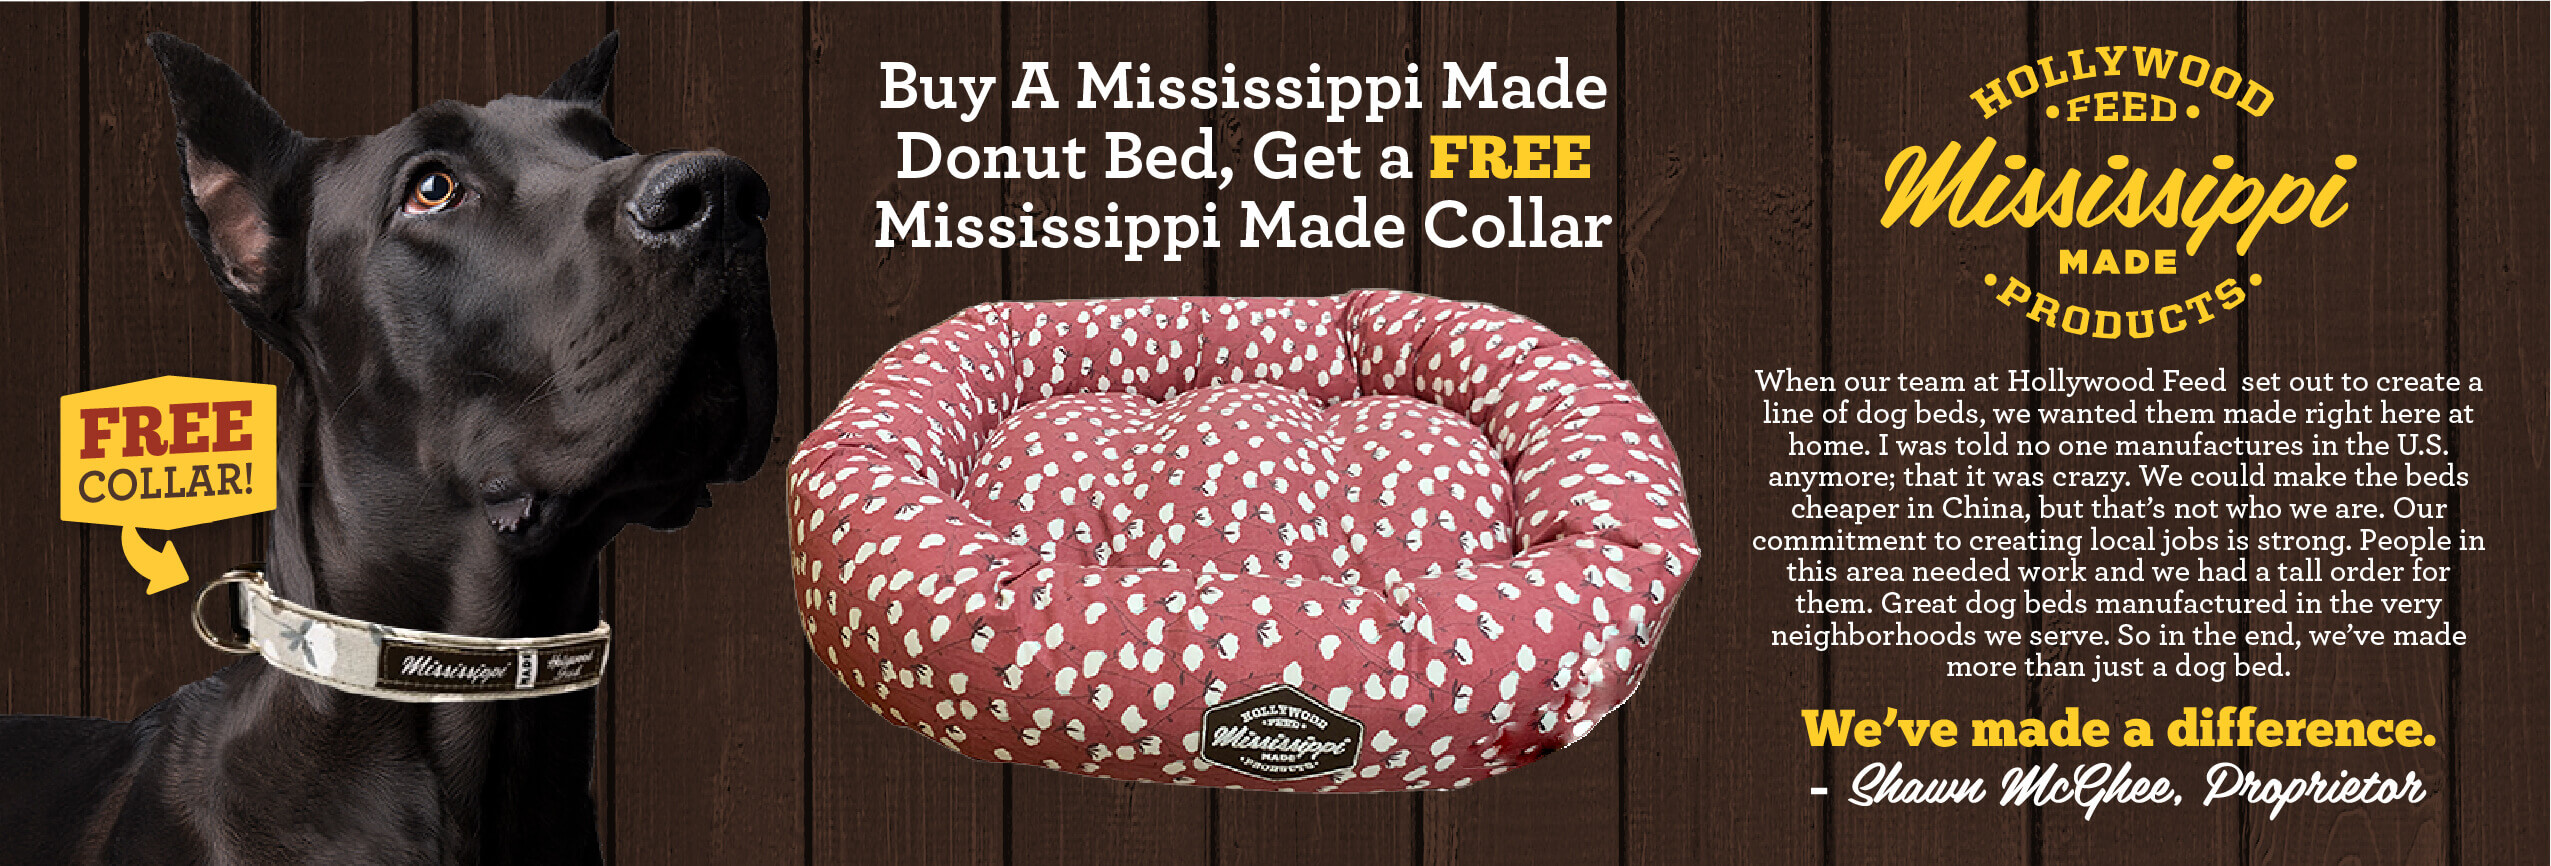 Buy A Mississippi Made Donut Bed, Get a Free Mississippi Made Collar